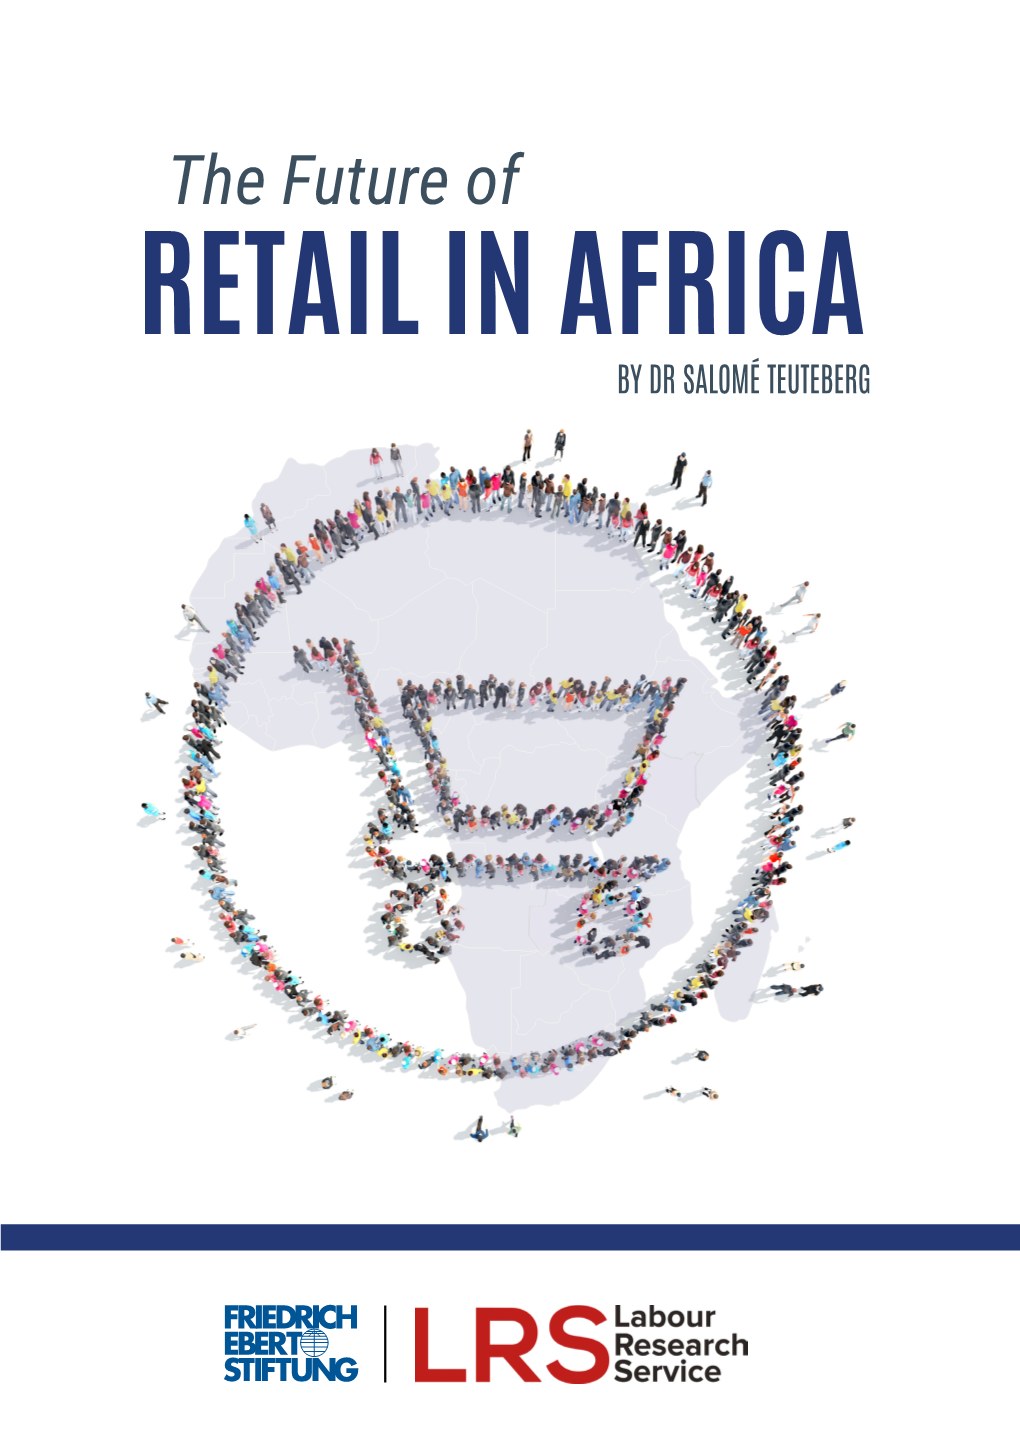 The Future of RETAIL in AFRICA by DR SALOMÉ TEUTEBERG by Salomé Teuteberg